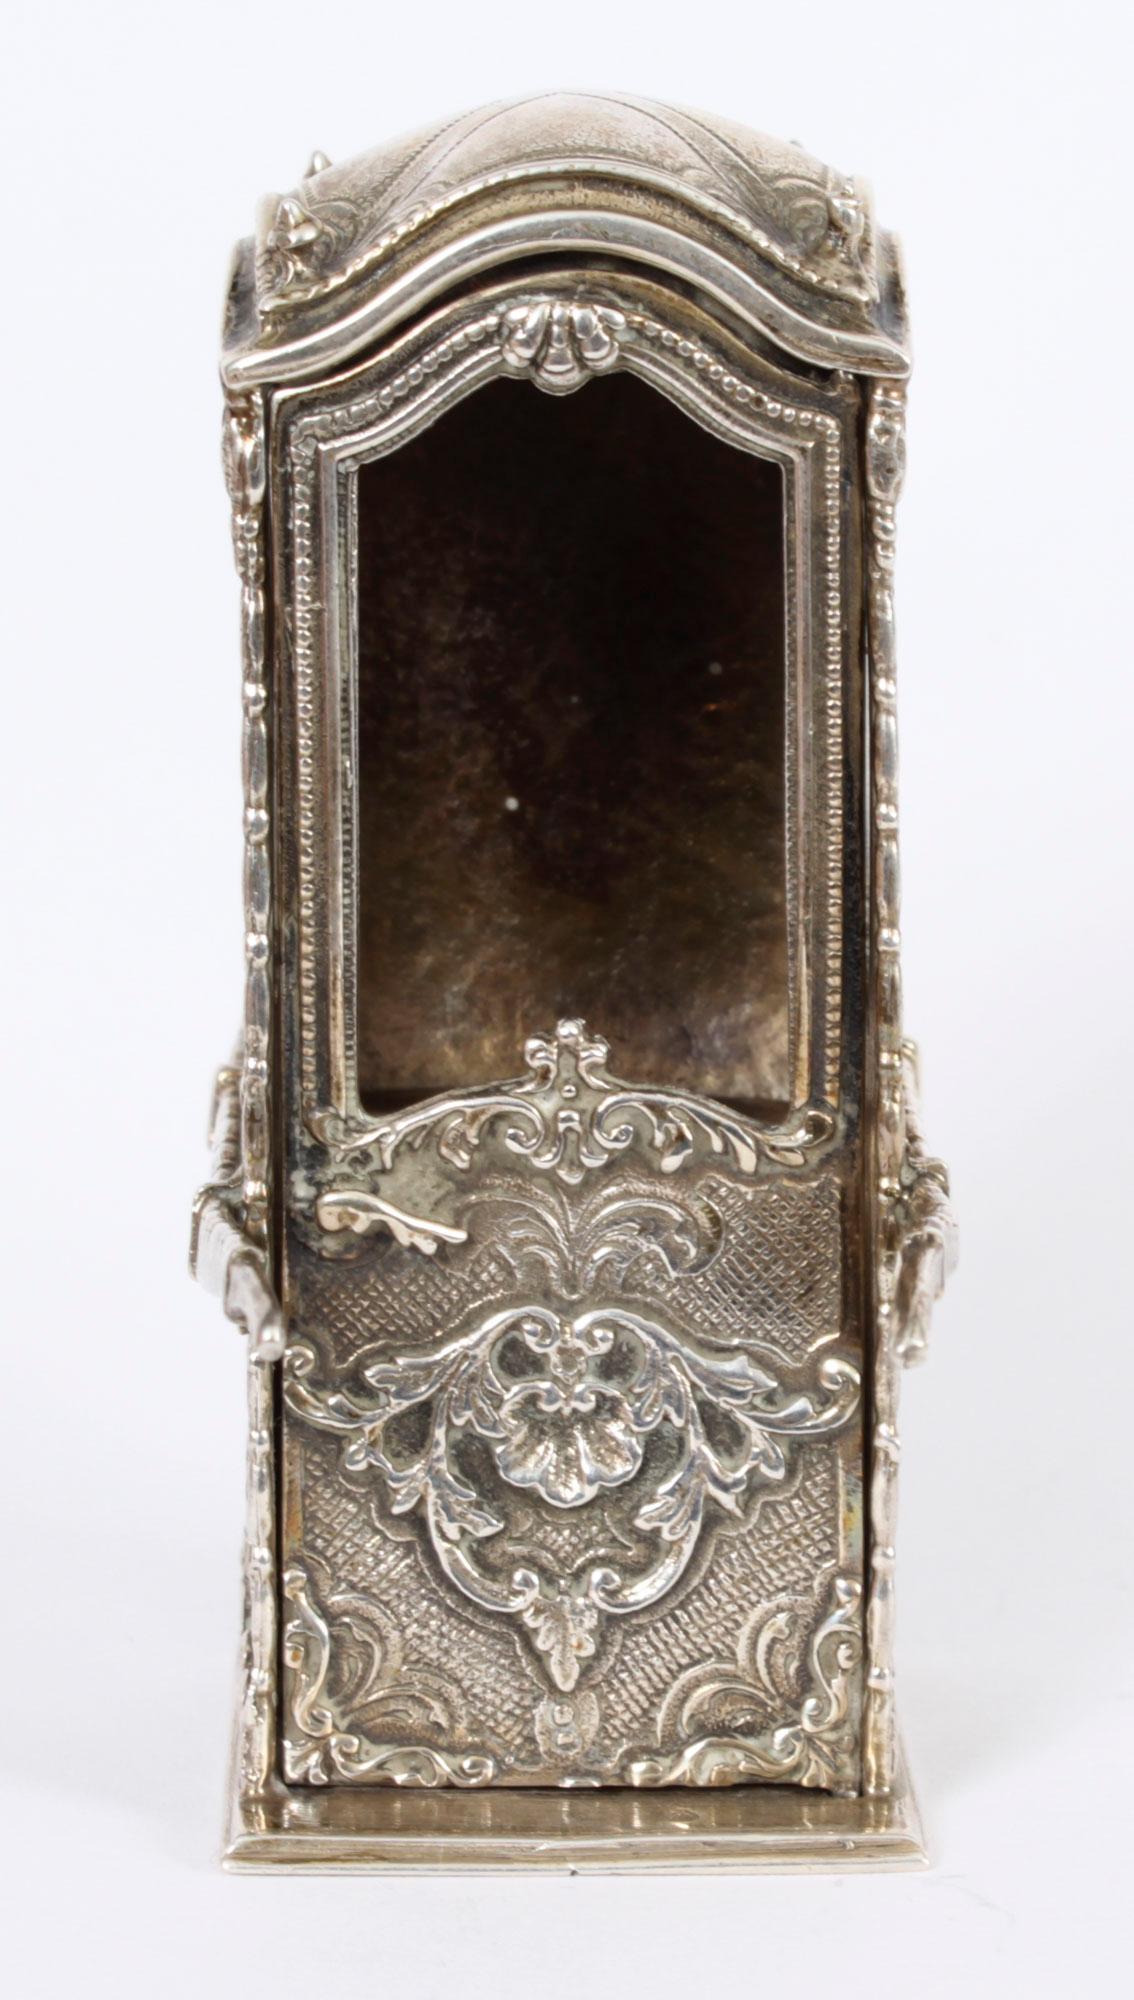 AntiqueFrench Silver Miniature Sedan Chair 19th Century For Sale 4